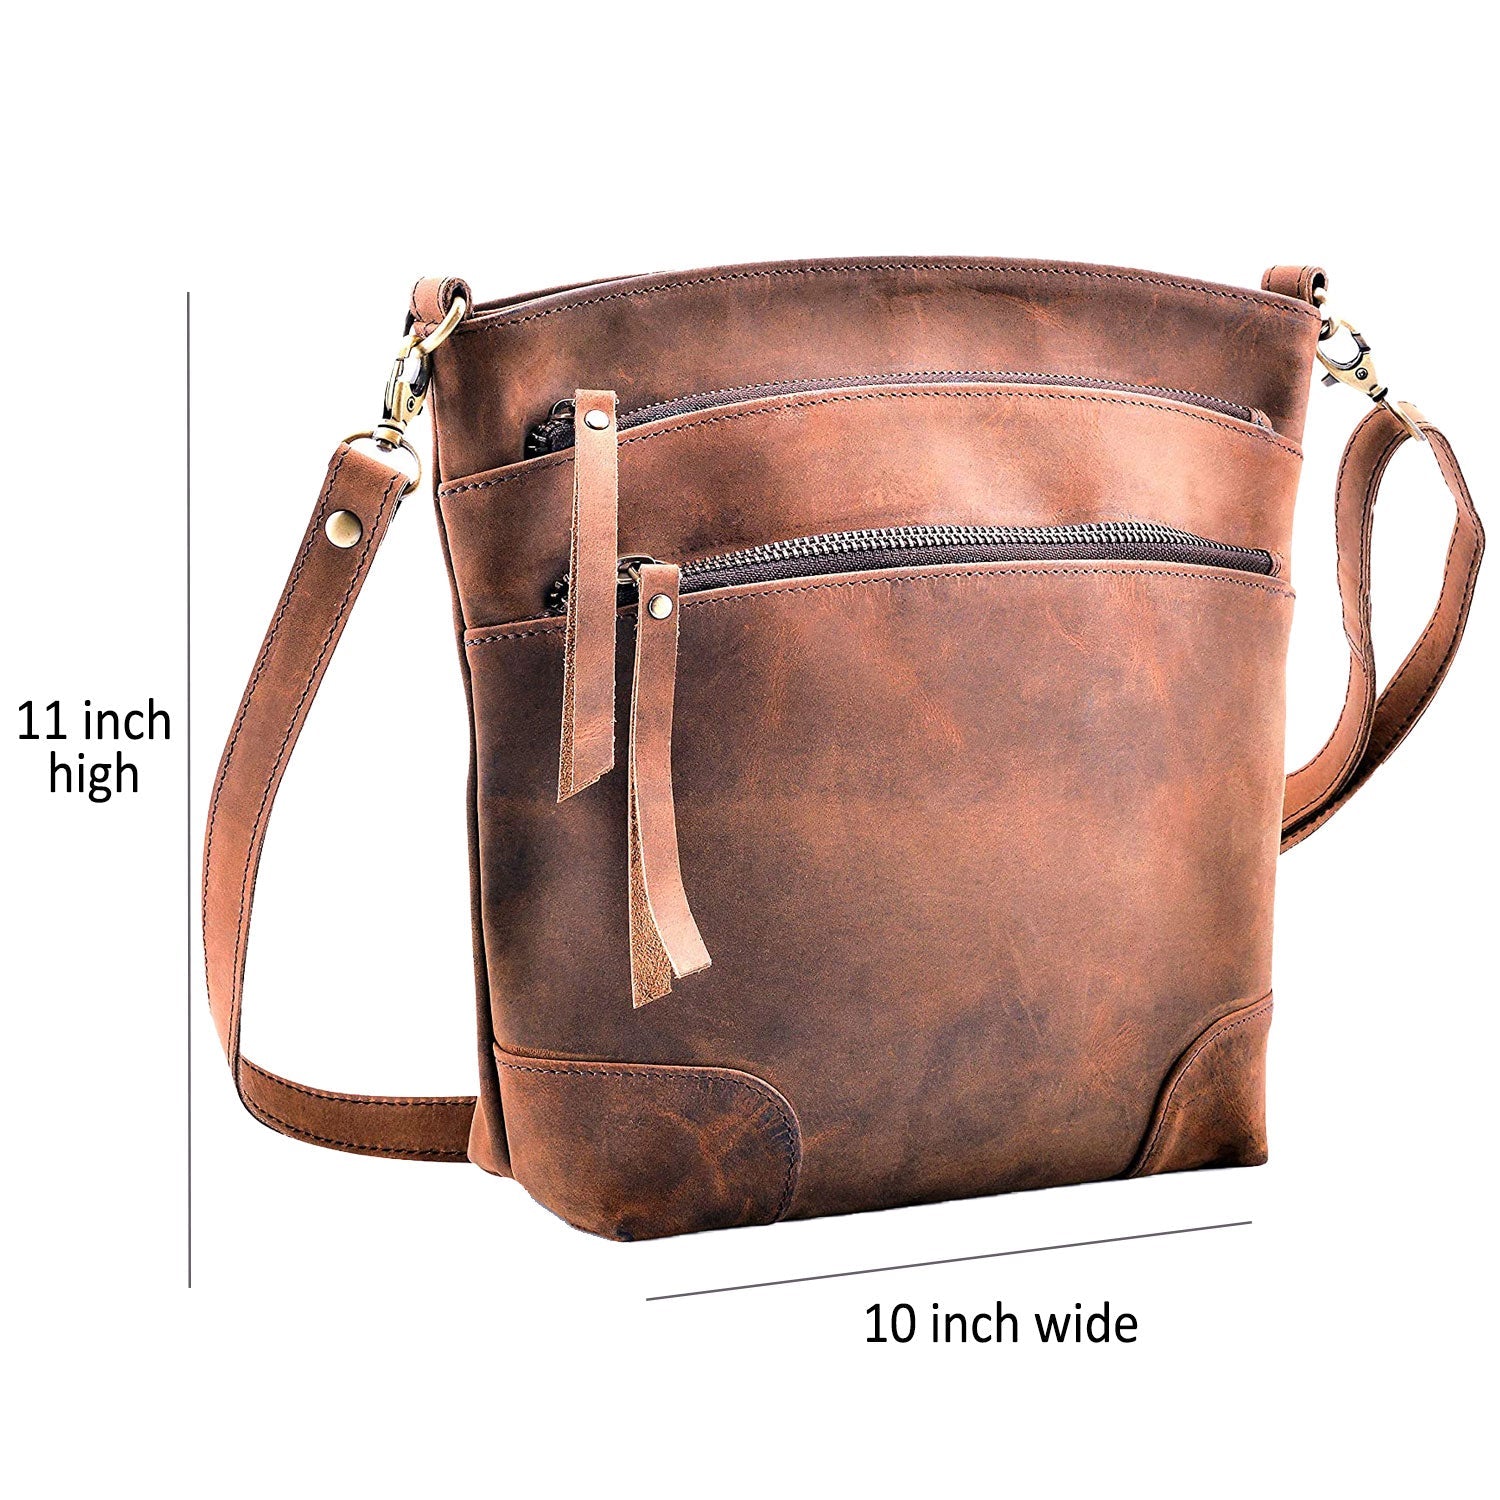 KPL Leather Crossbody Bag for women purse tote ladies bags satchel tra